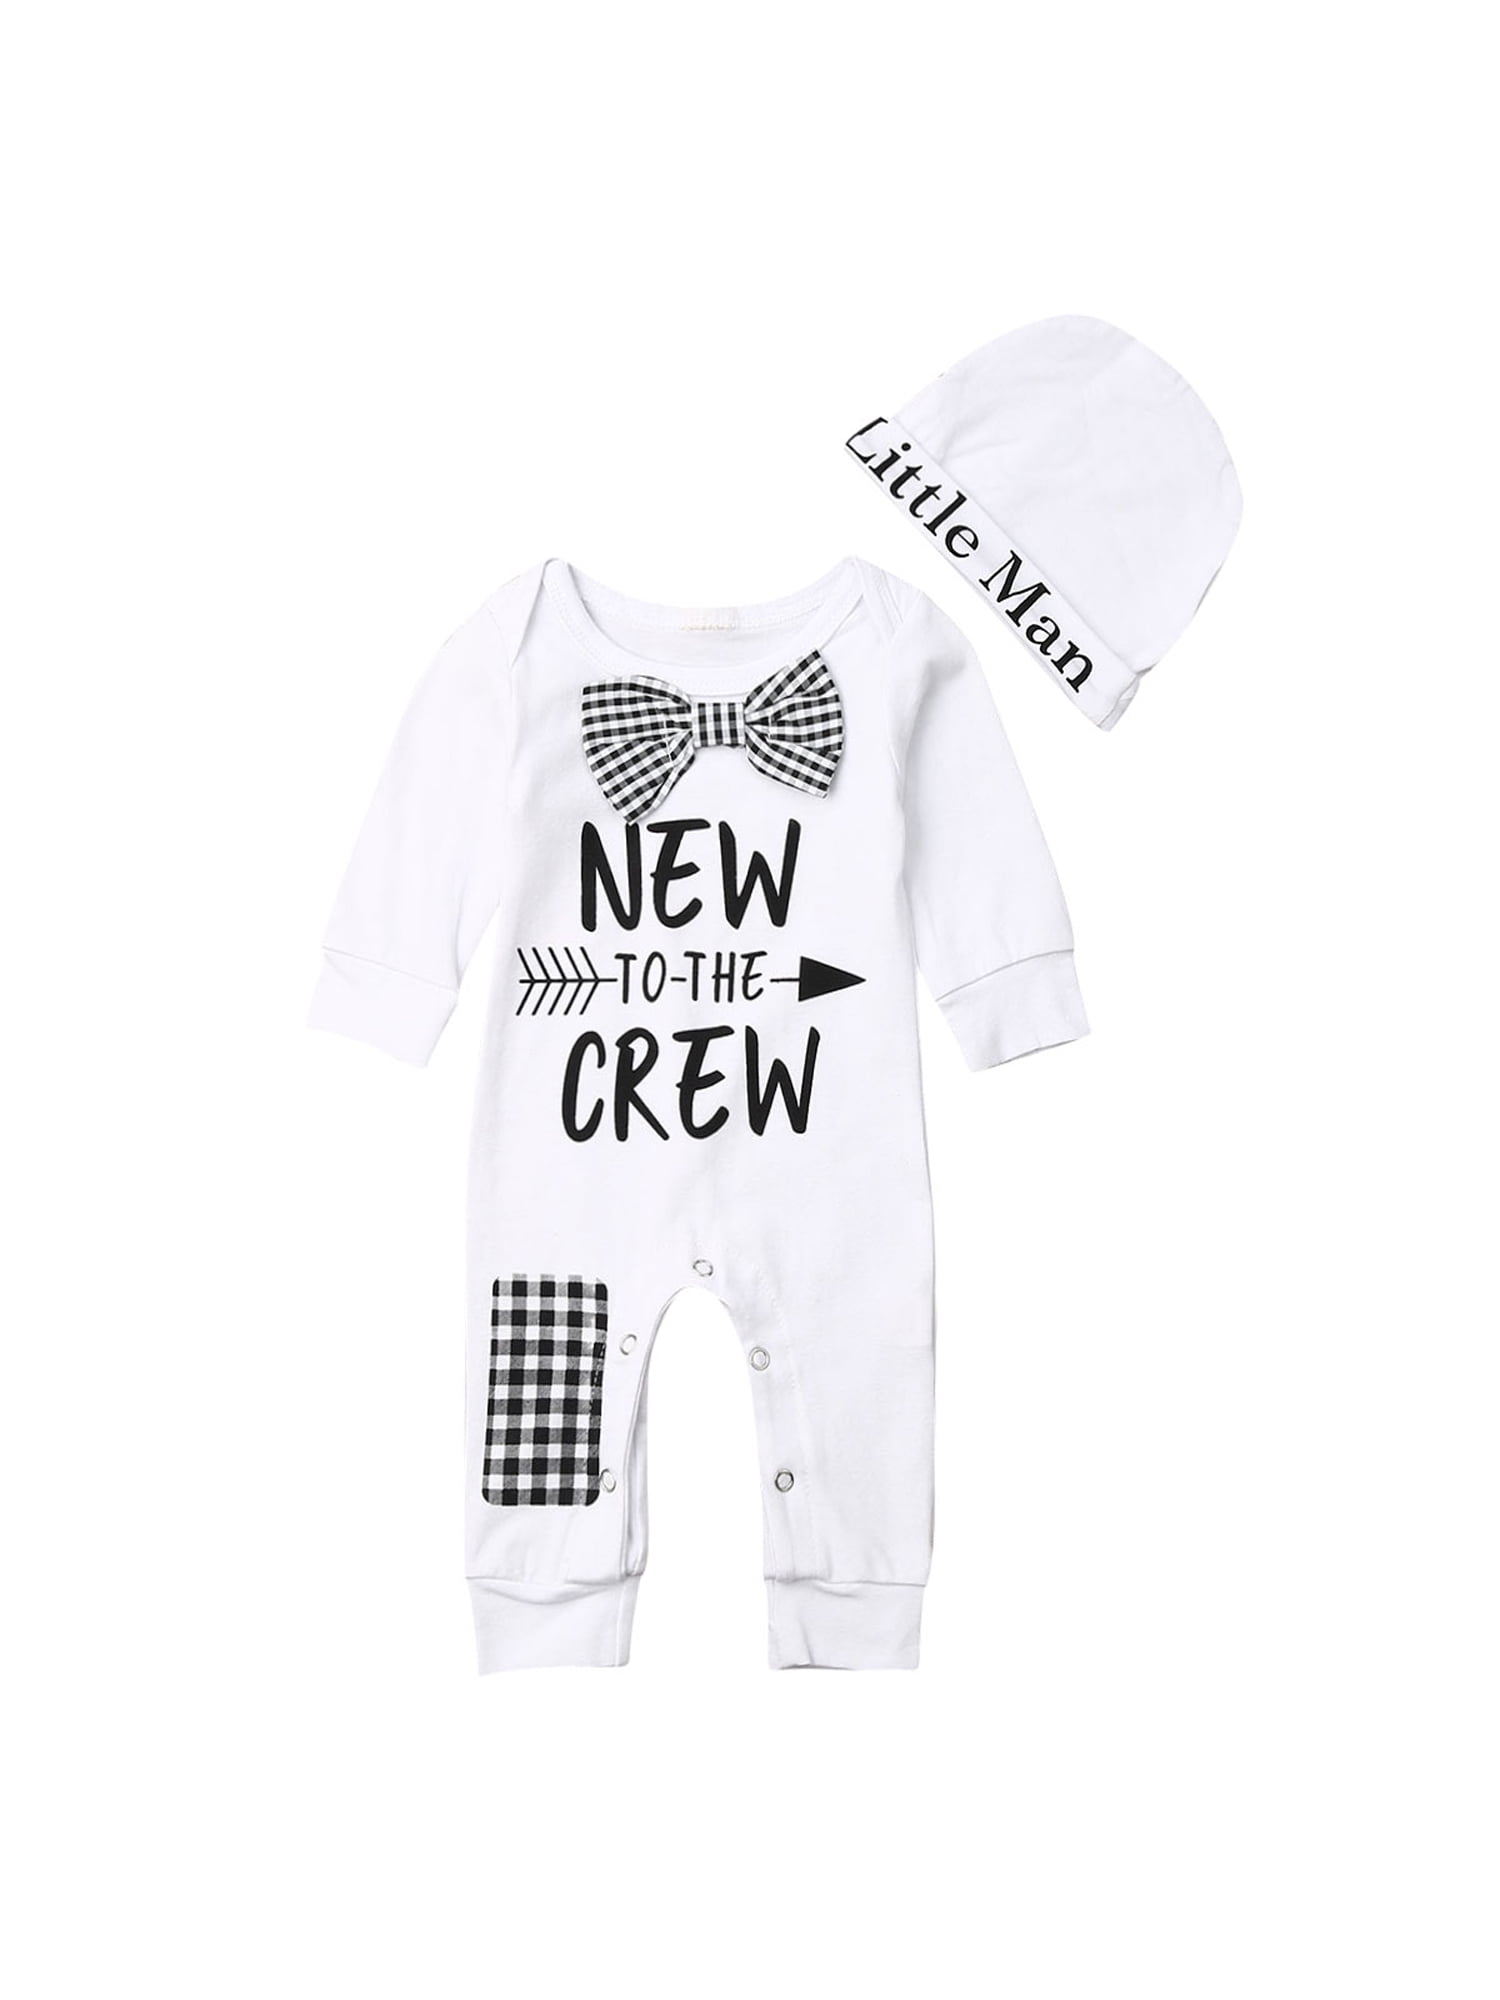 Newborn Baby Boy Clothes Romper New to The Crew Funny Printed Onesies Bodysuit Outfits 